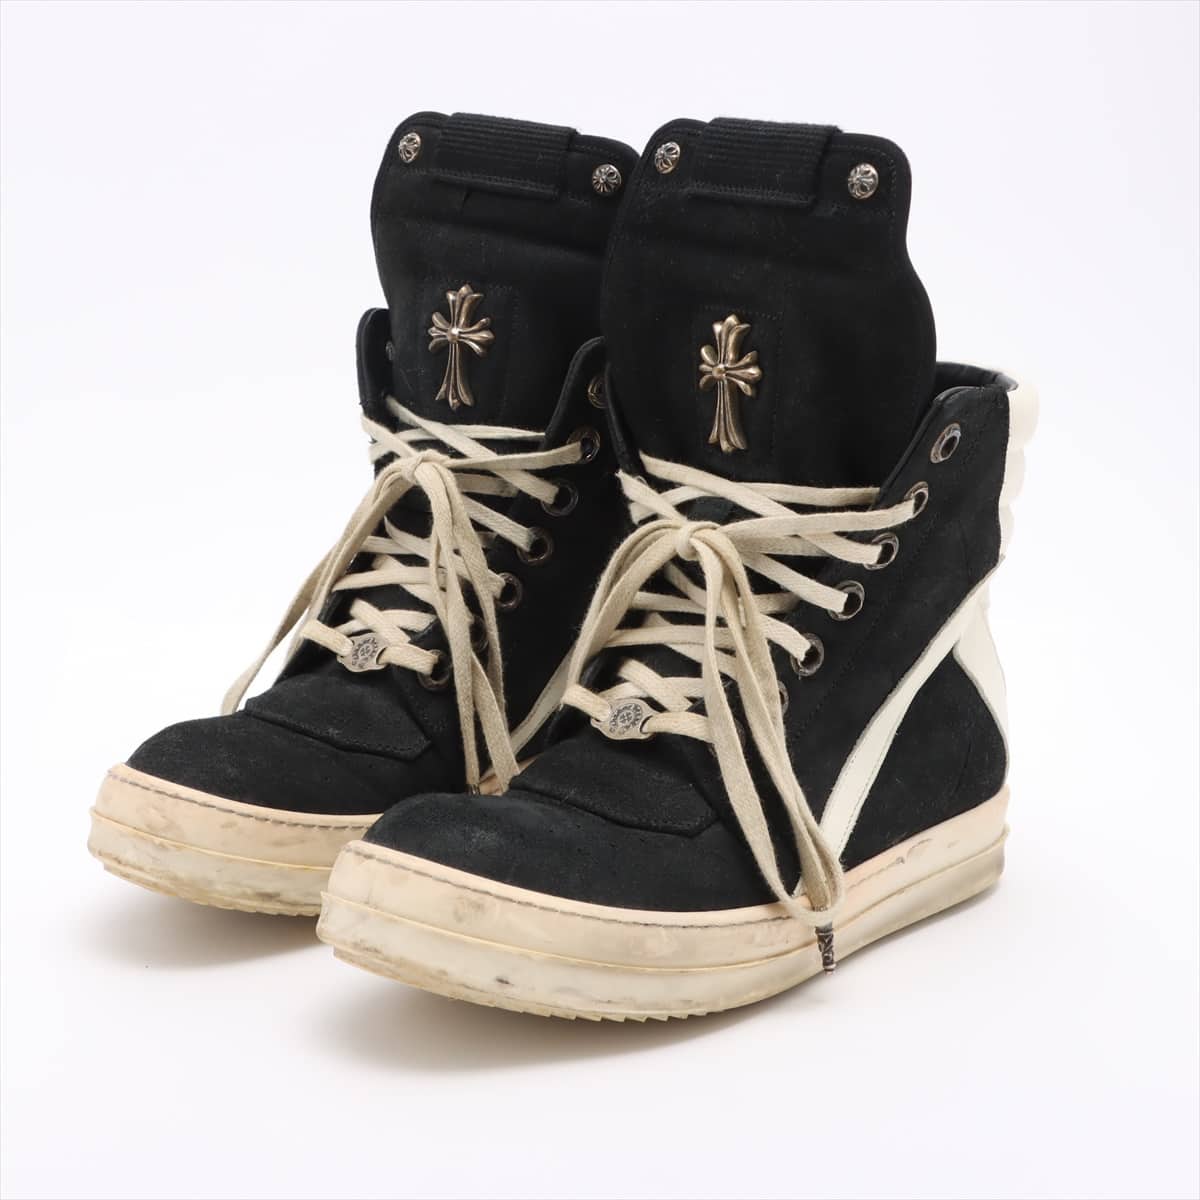 Chrome Hearts x Rick Owens Geobasket Sneakers Suede & leather black x white 37 Comes with a replacement string